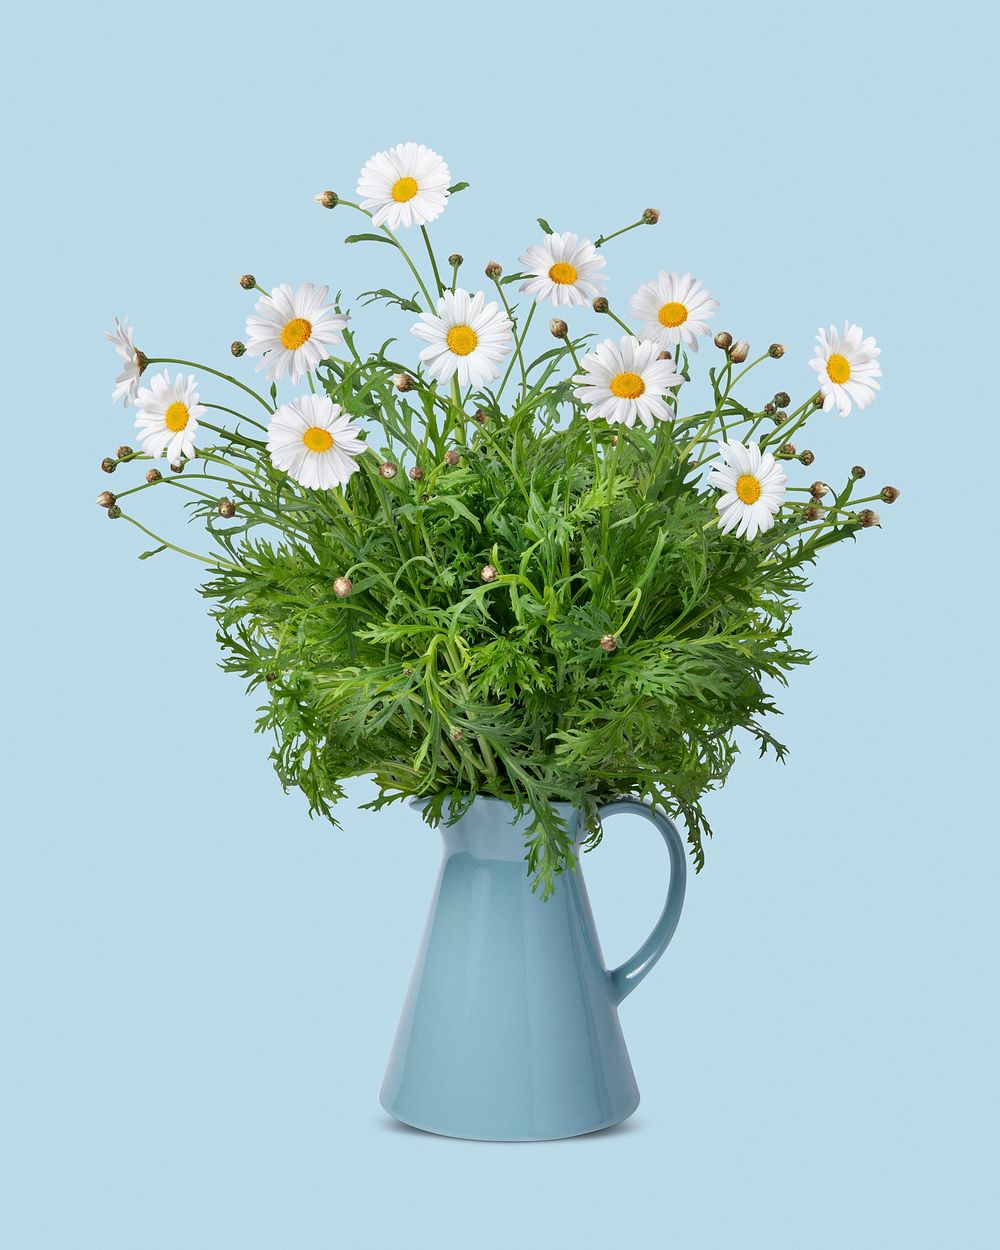 Daisies in blue vase, isolated object design psd